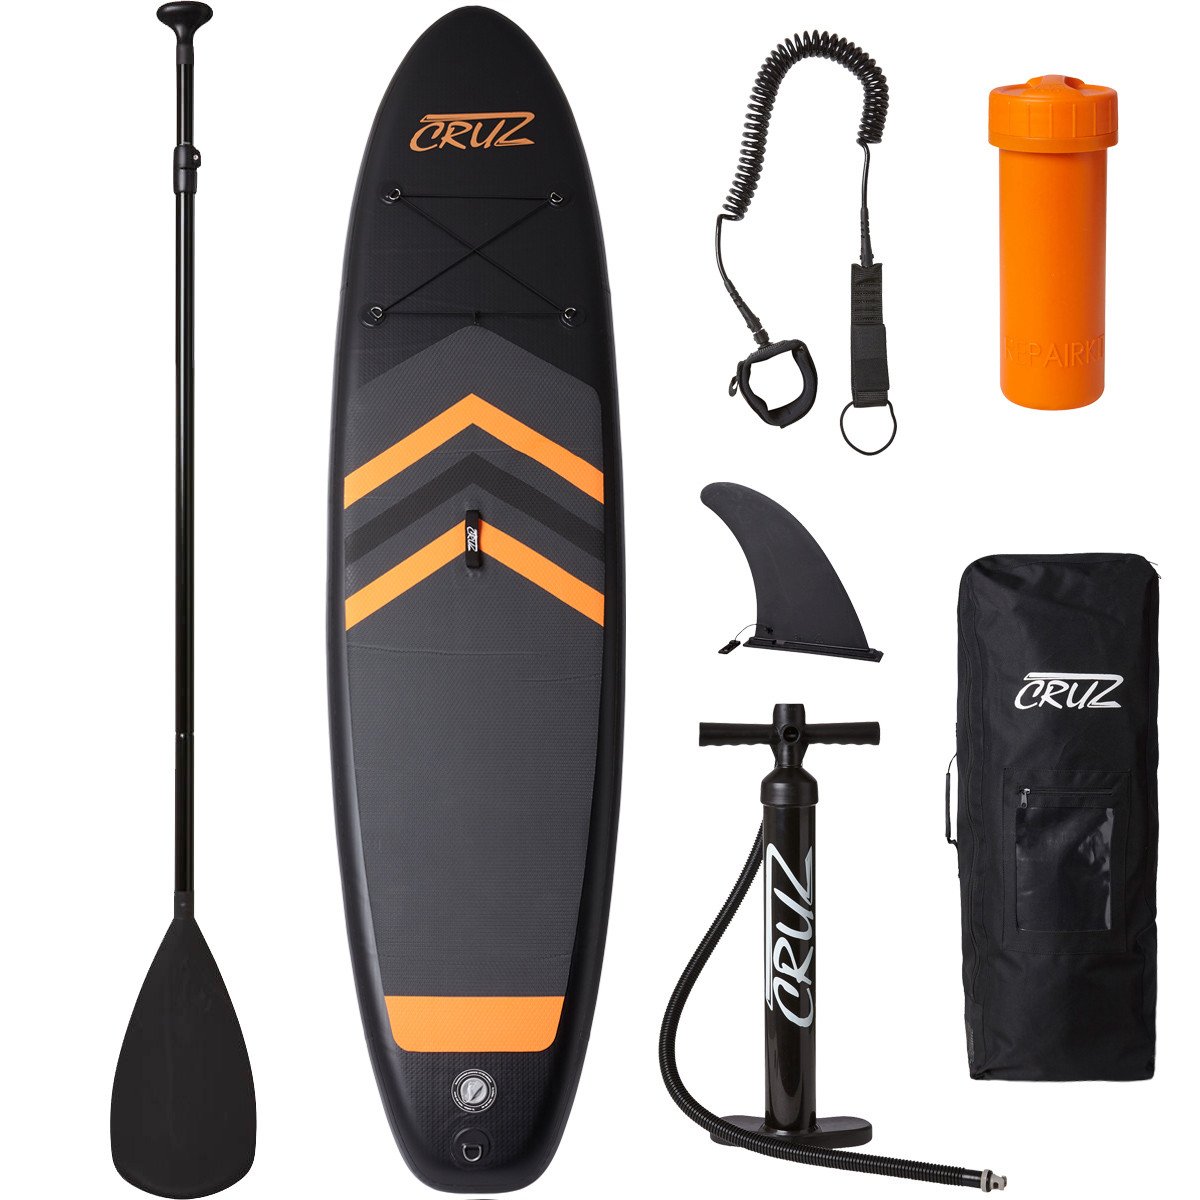 Cruz Oppusteligt 2-lags Stand Up Paddle board, Black